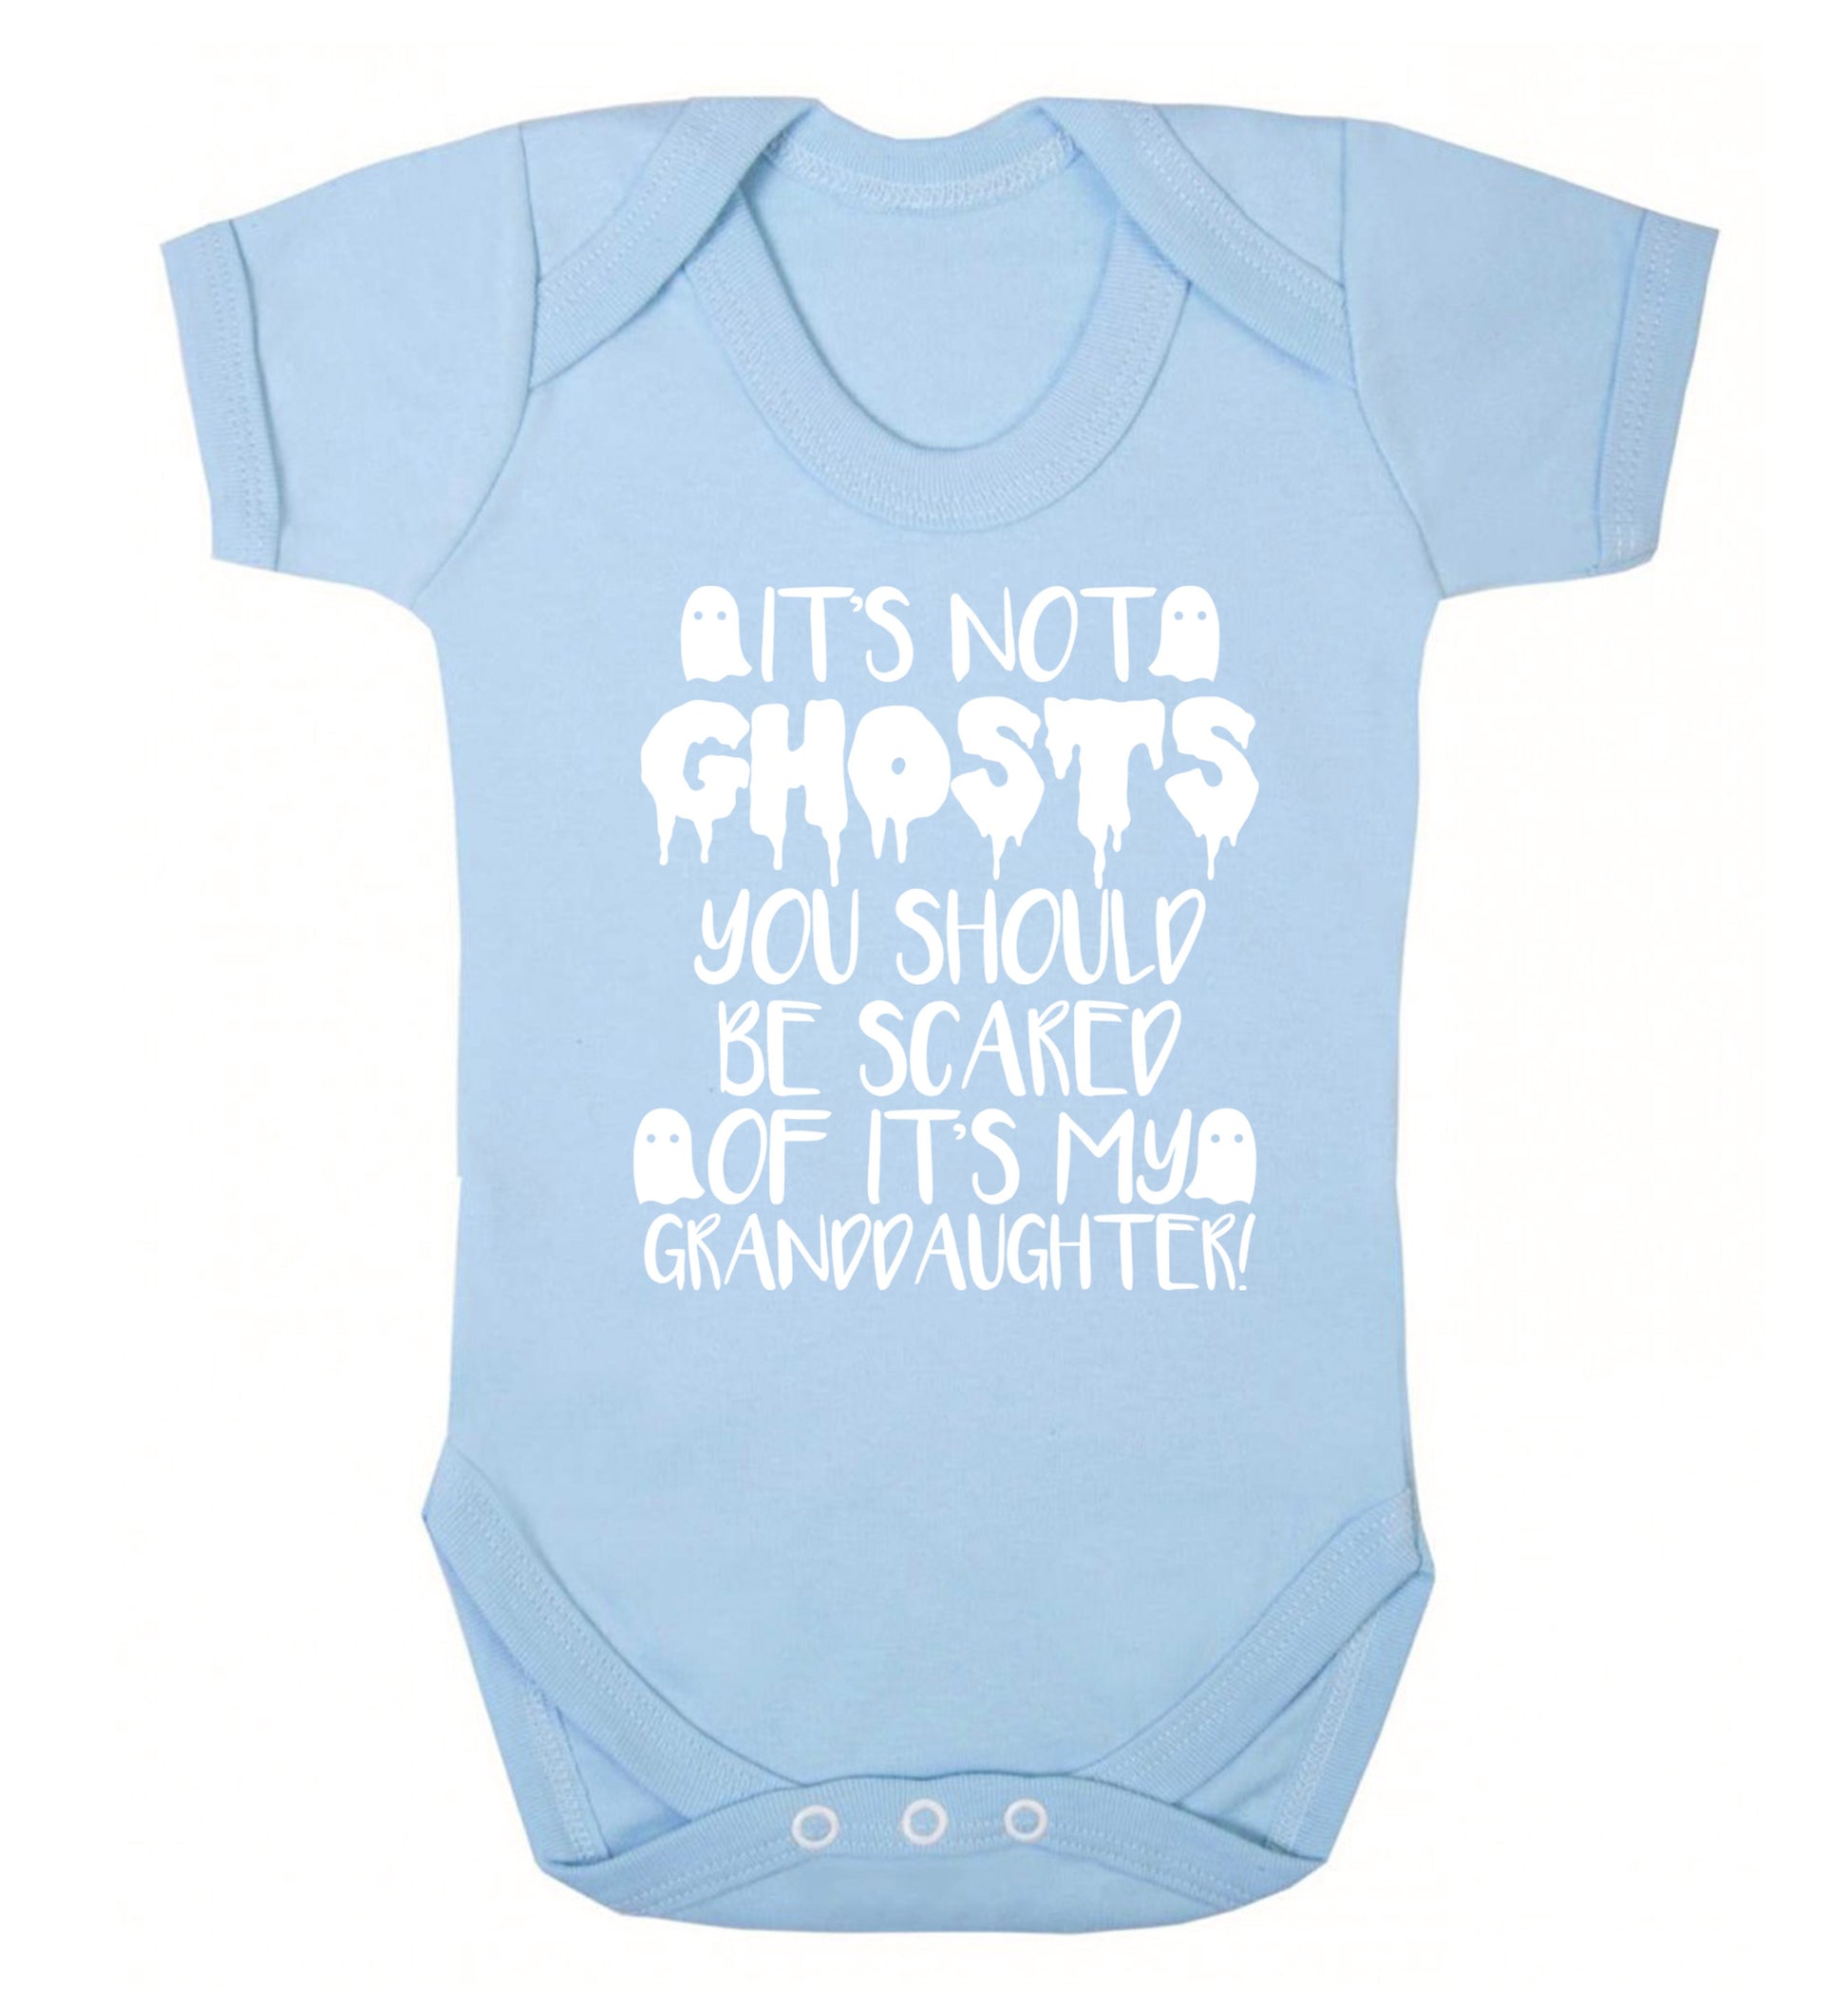 It's not ghosts you should be scared of it's my granddaughter! Baby Vest pale blue 18-24 months